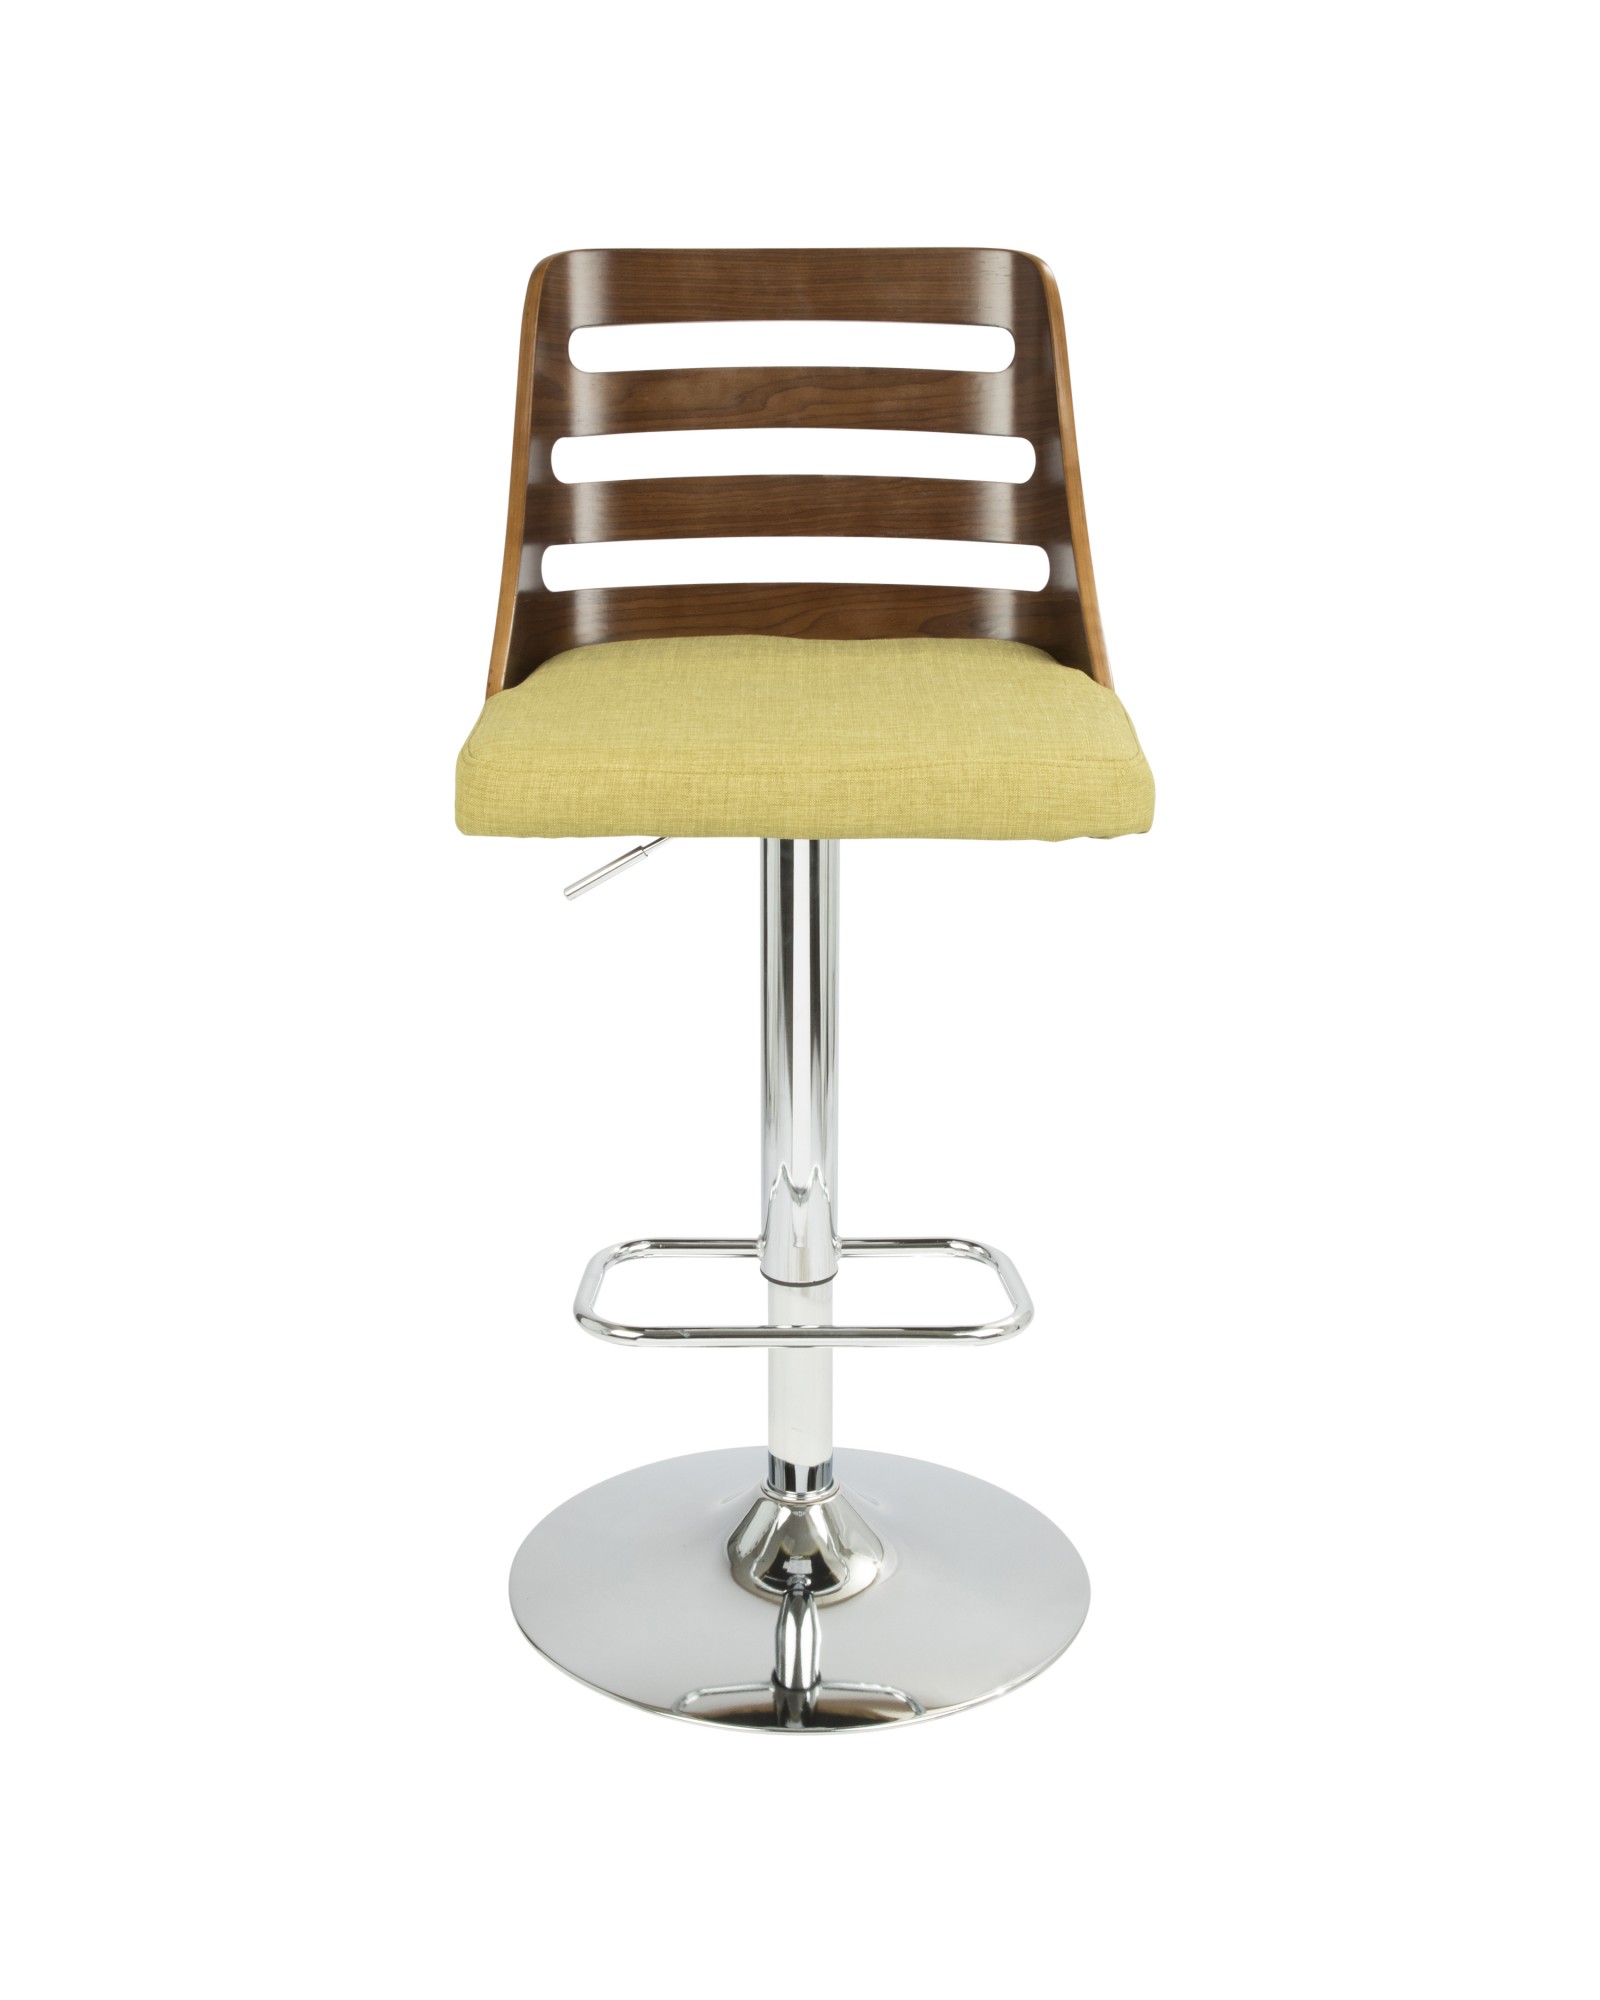 Trevi Mid-Century Modern Adjustable Barstool with Swivel in Walnut and Green